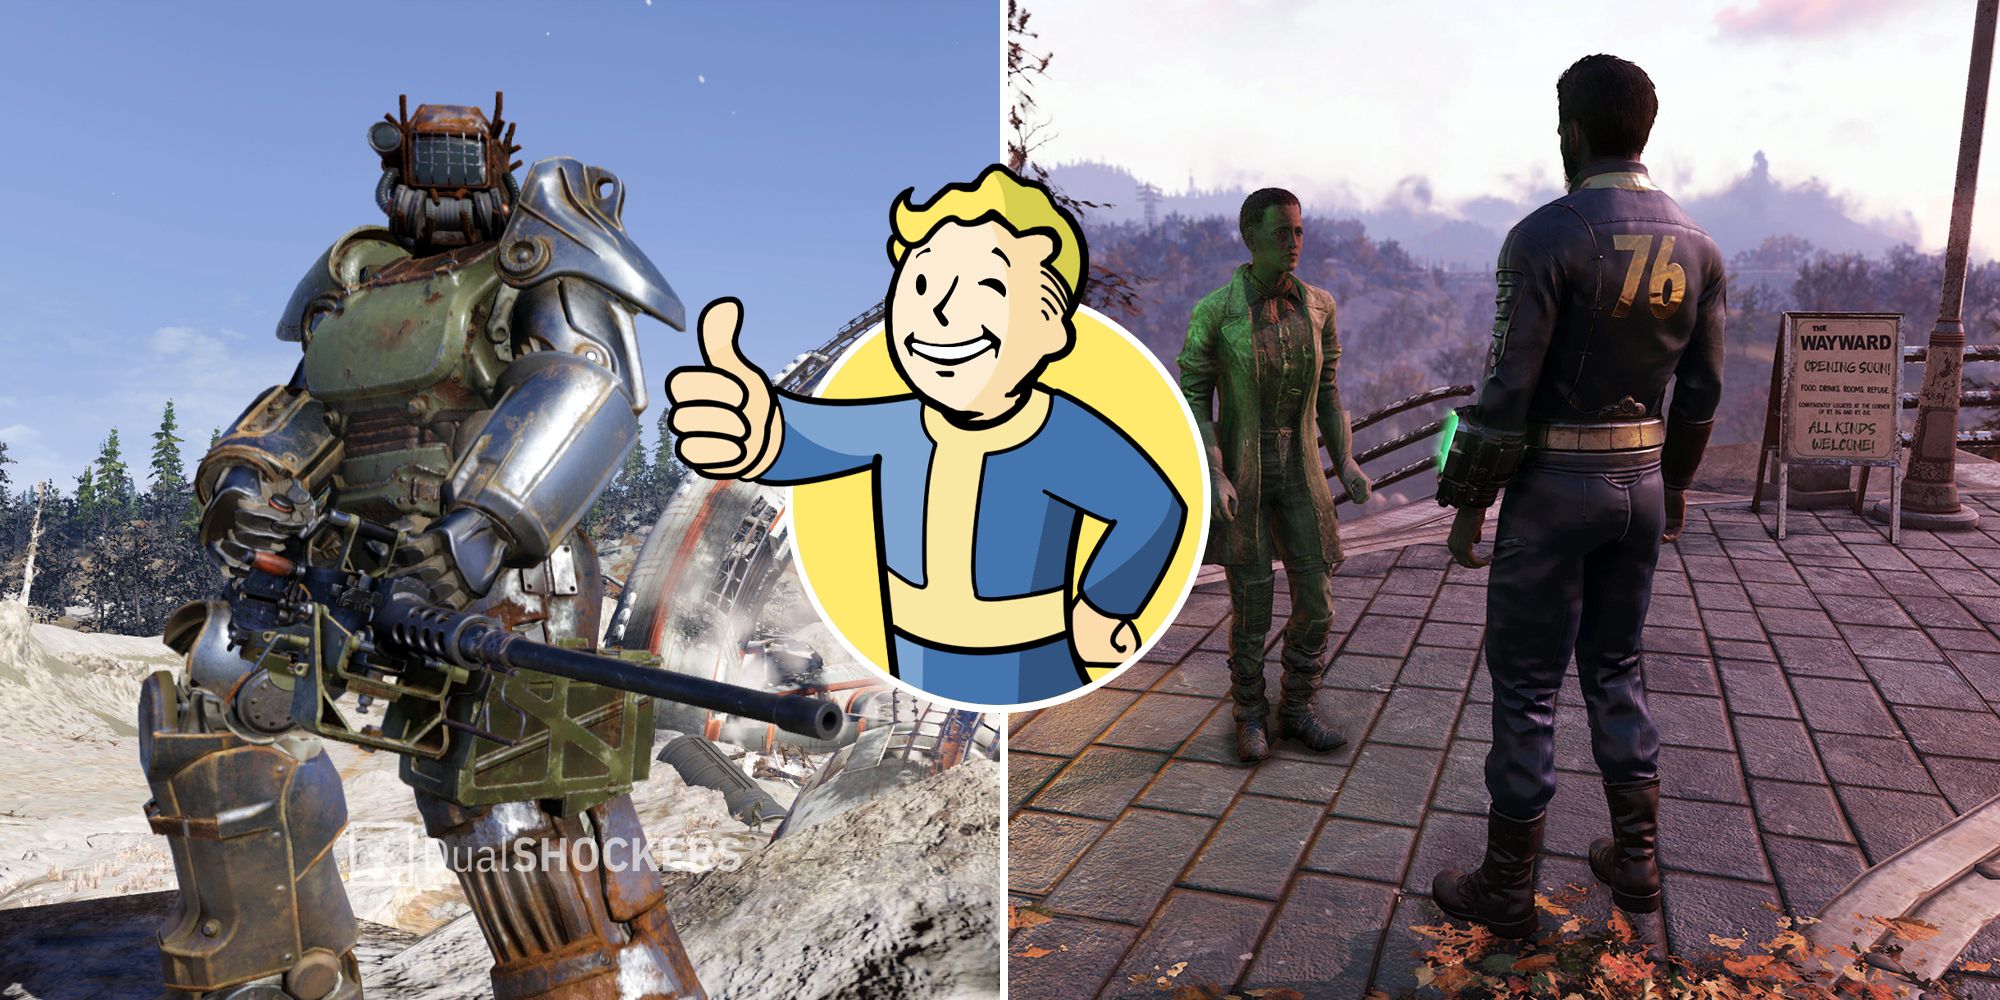 Fallout 76 power armor on left, Vault Boy in middle, Fallout 76 character in suit on right